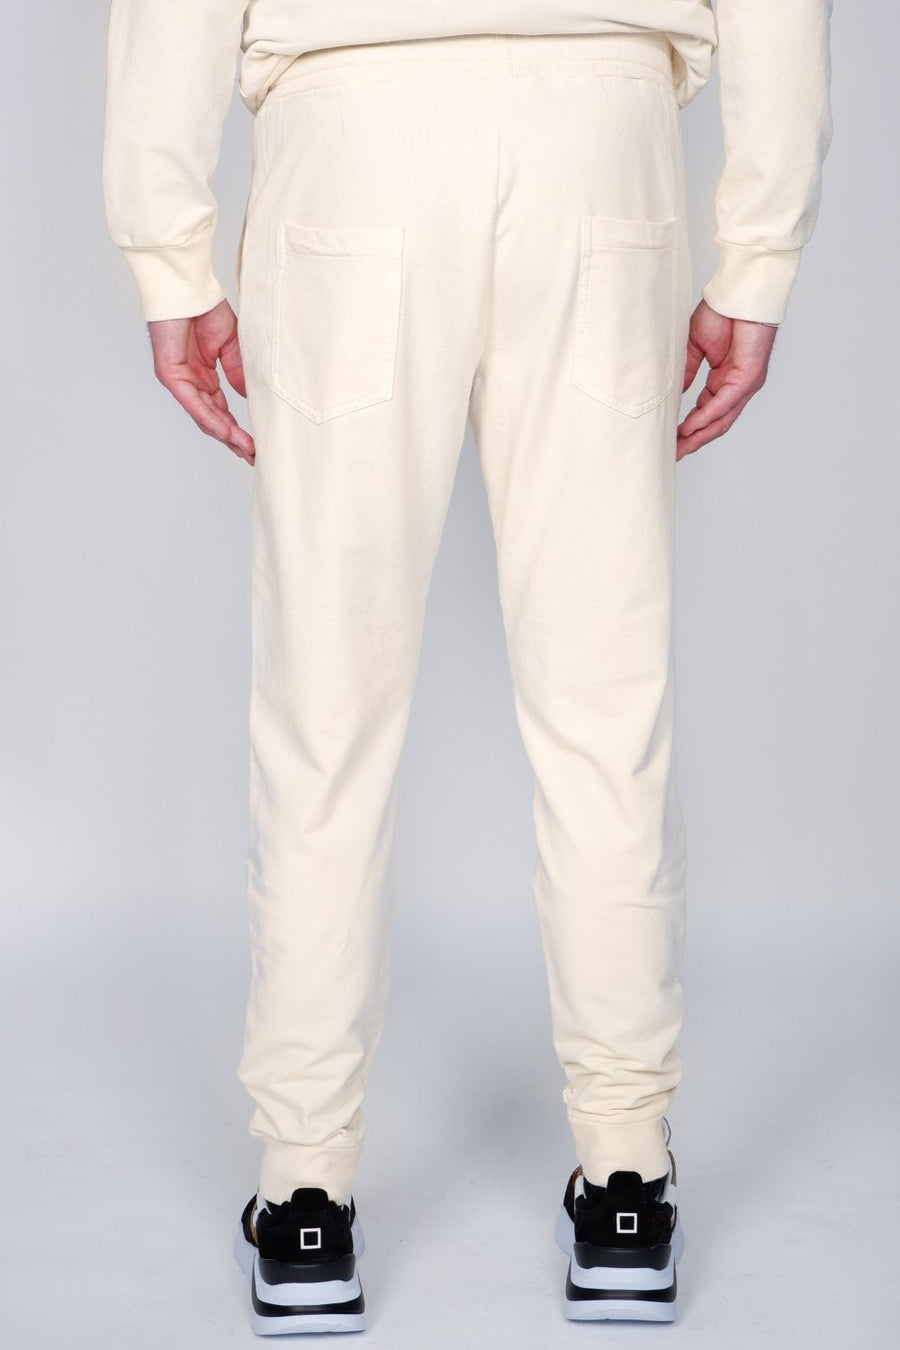 Buy the Daniele Fiesoli Jersey Joggers Off White at Intro. Spend £100 for free next day UK delivery. Official stockists. We ship worldwide